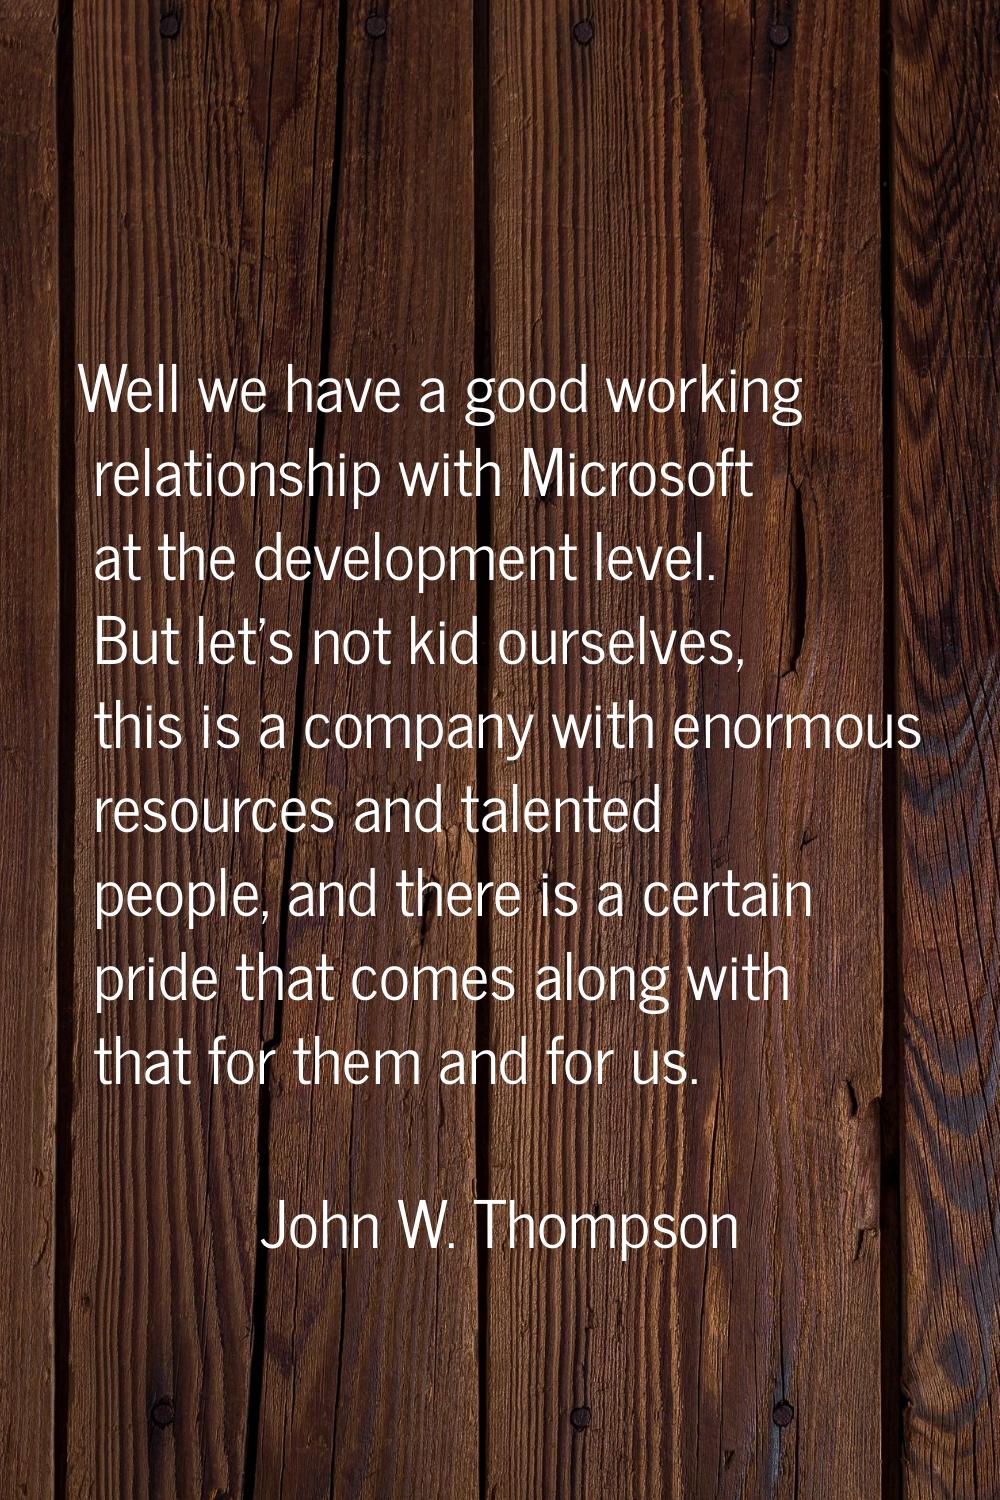 Well we have a good working relationship with Microsoft at the development level. But let's not kid